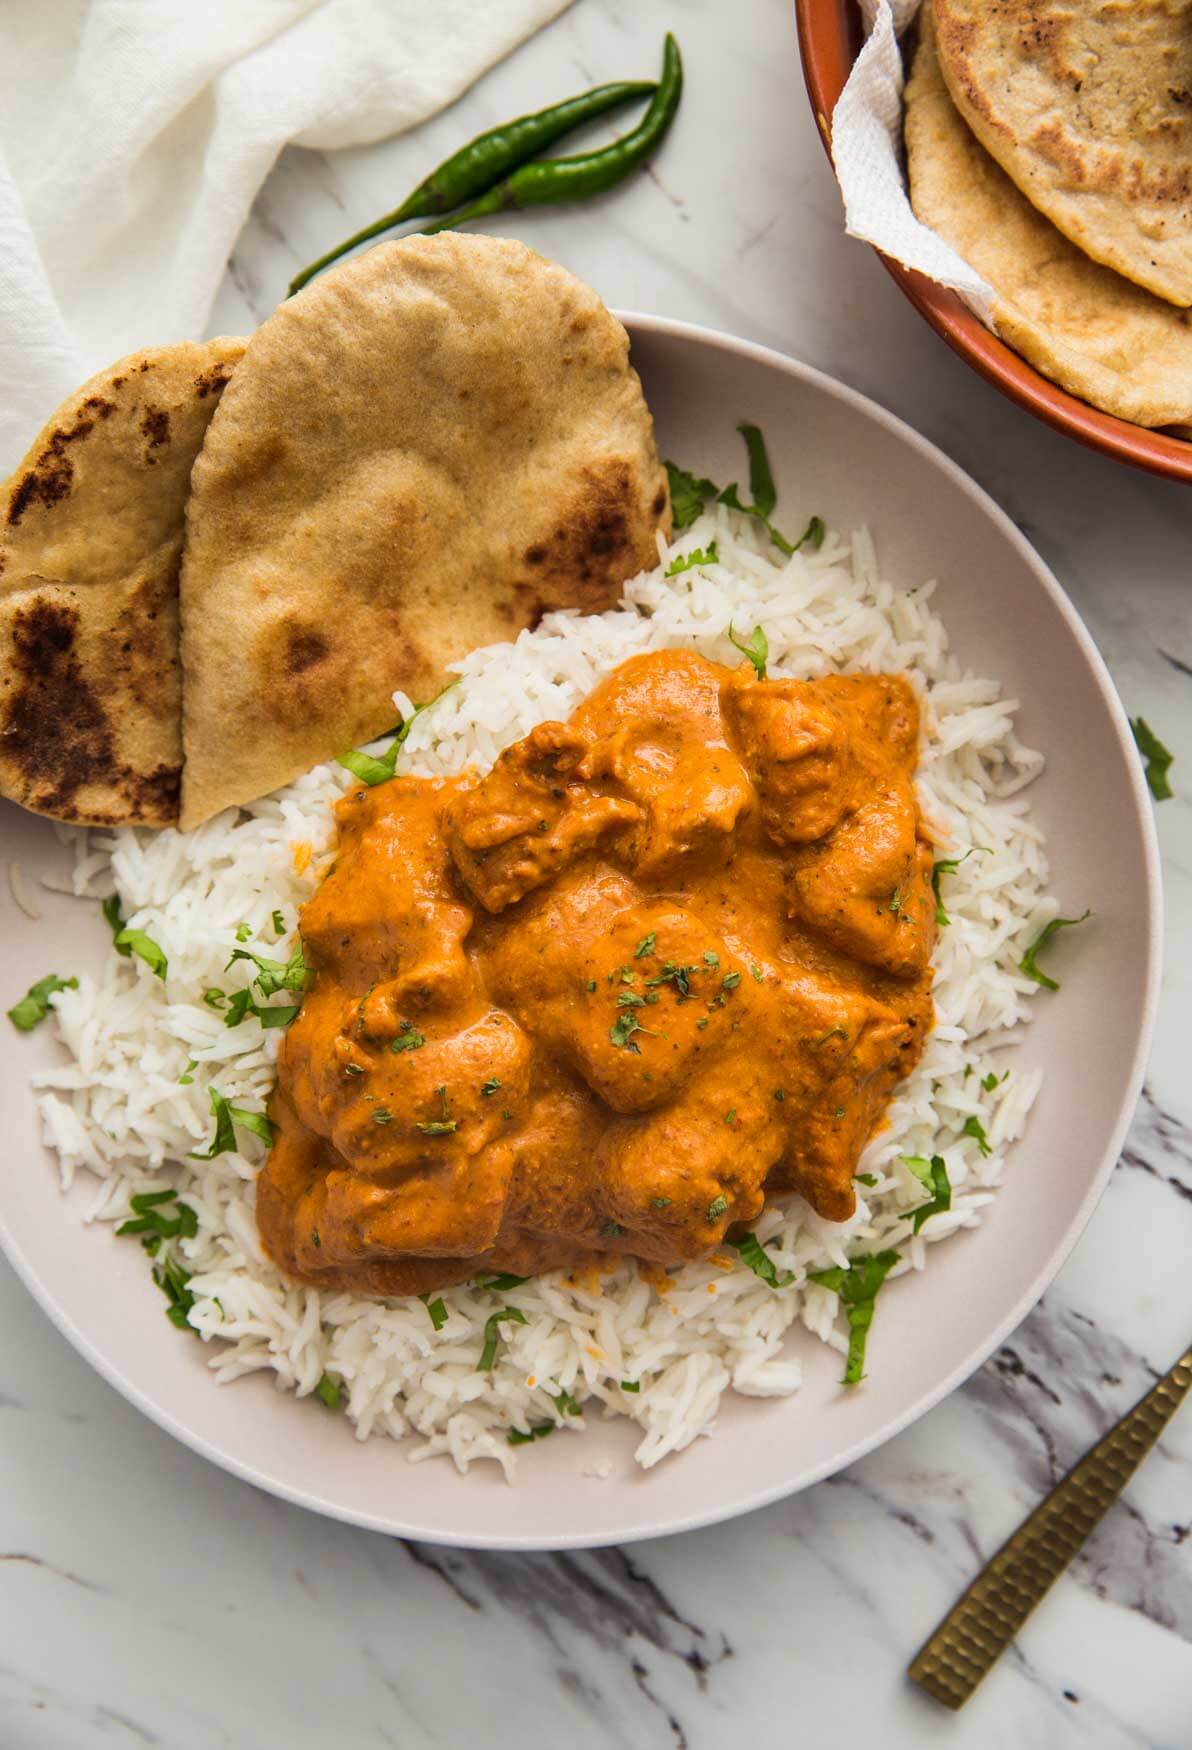 Restaurant style chicken tikka masala ready to serve in serving plate with homemade naan bread and plain rice